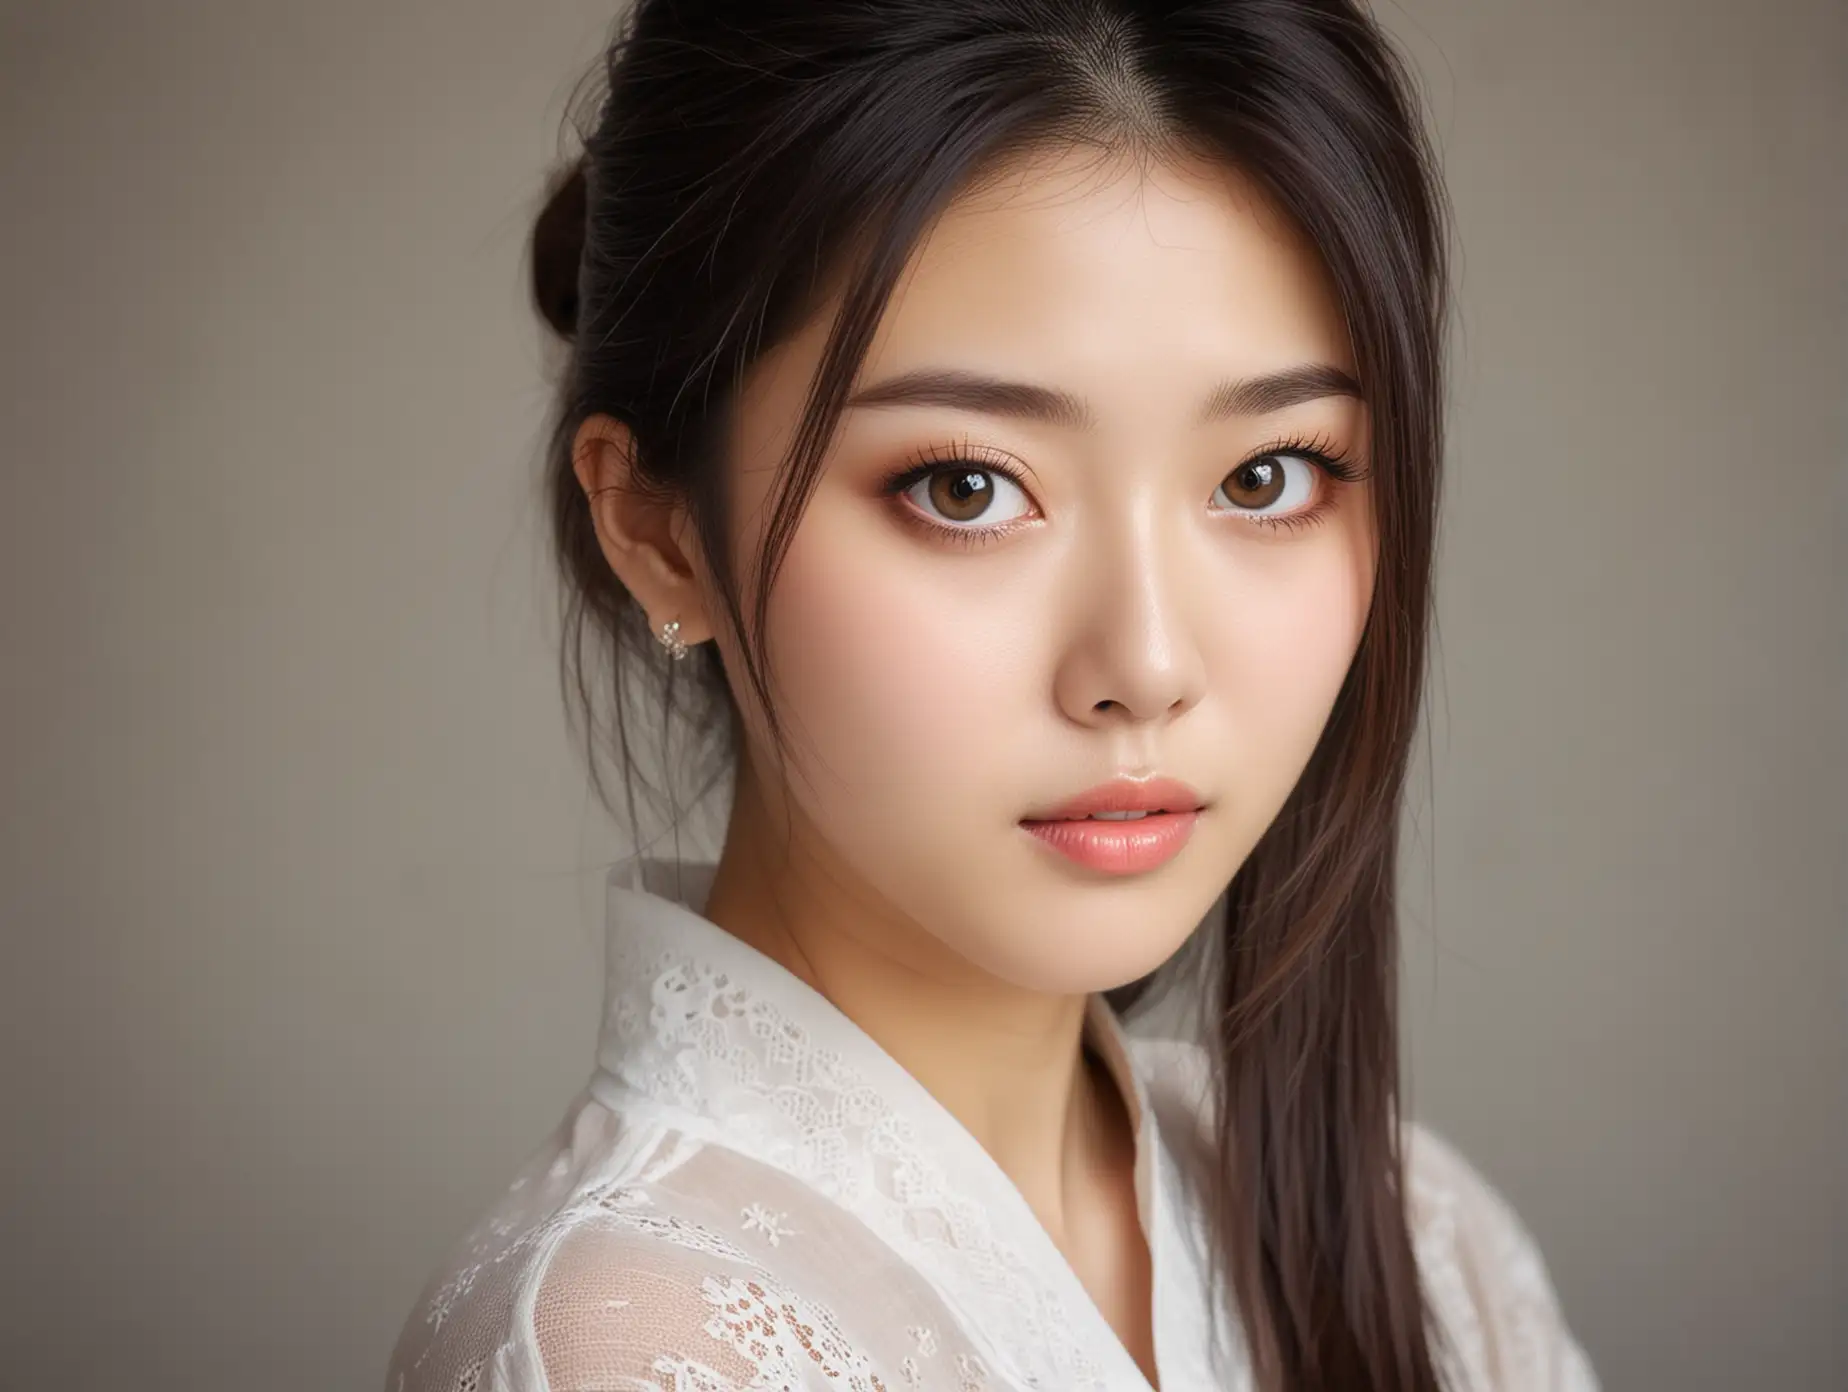 Beautiful-Chinese-Woman-with-Big-Eyes-Full-Body-Portrait